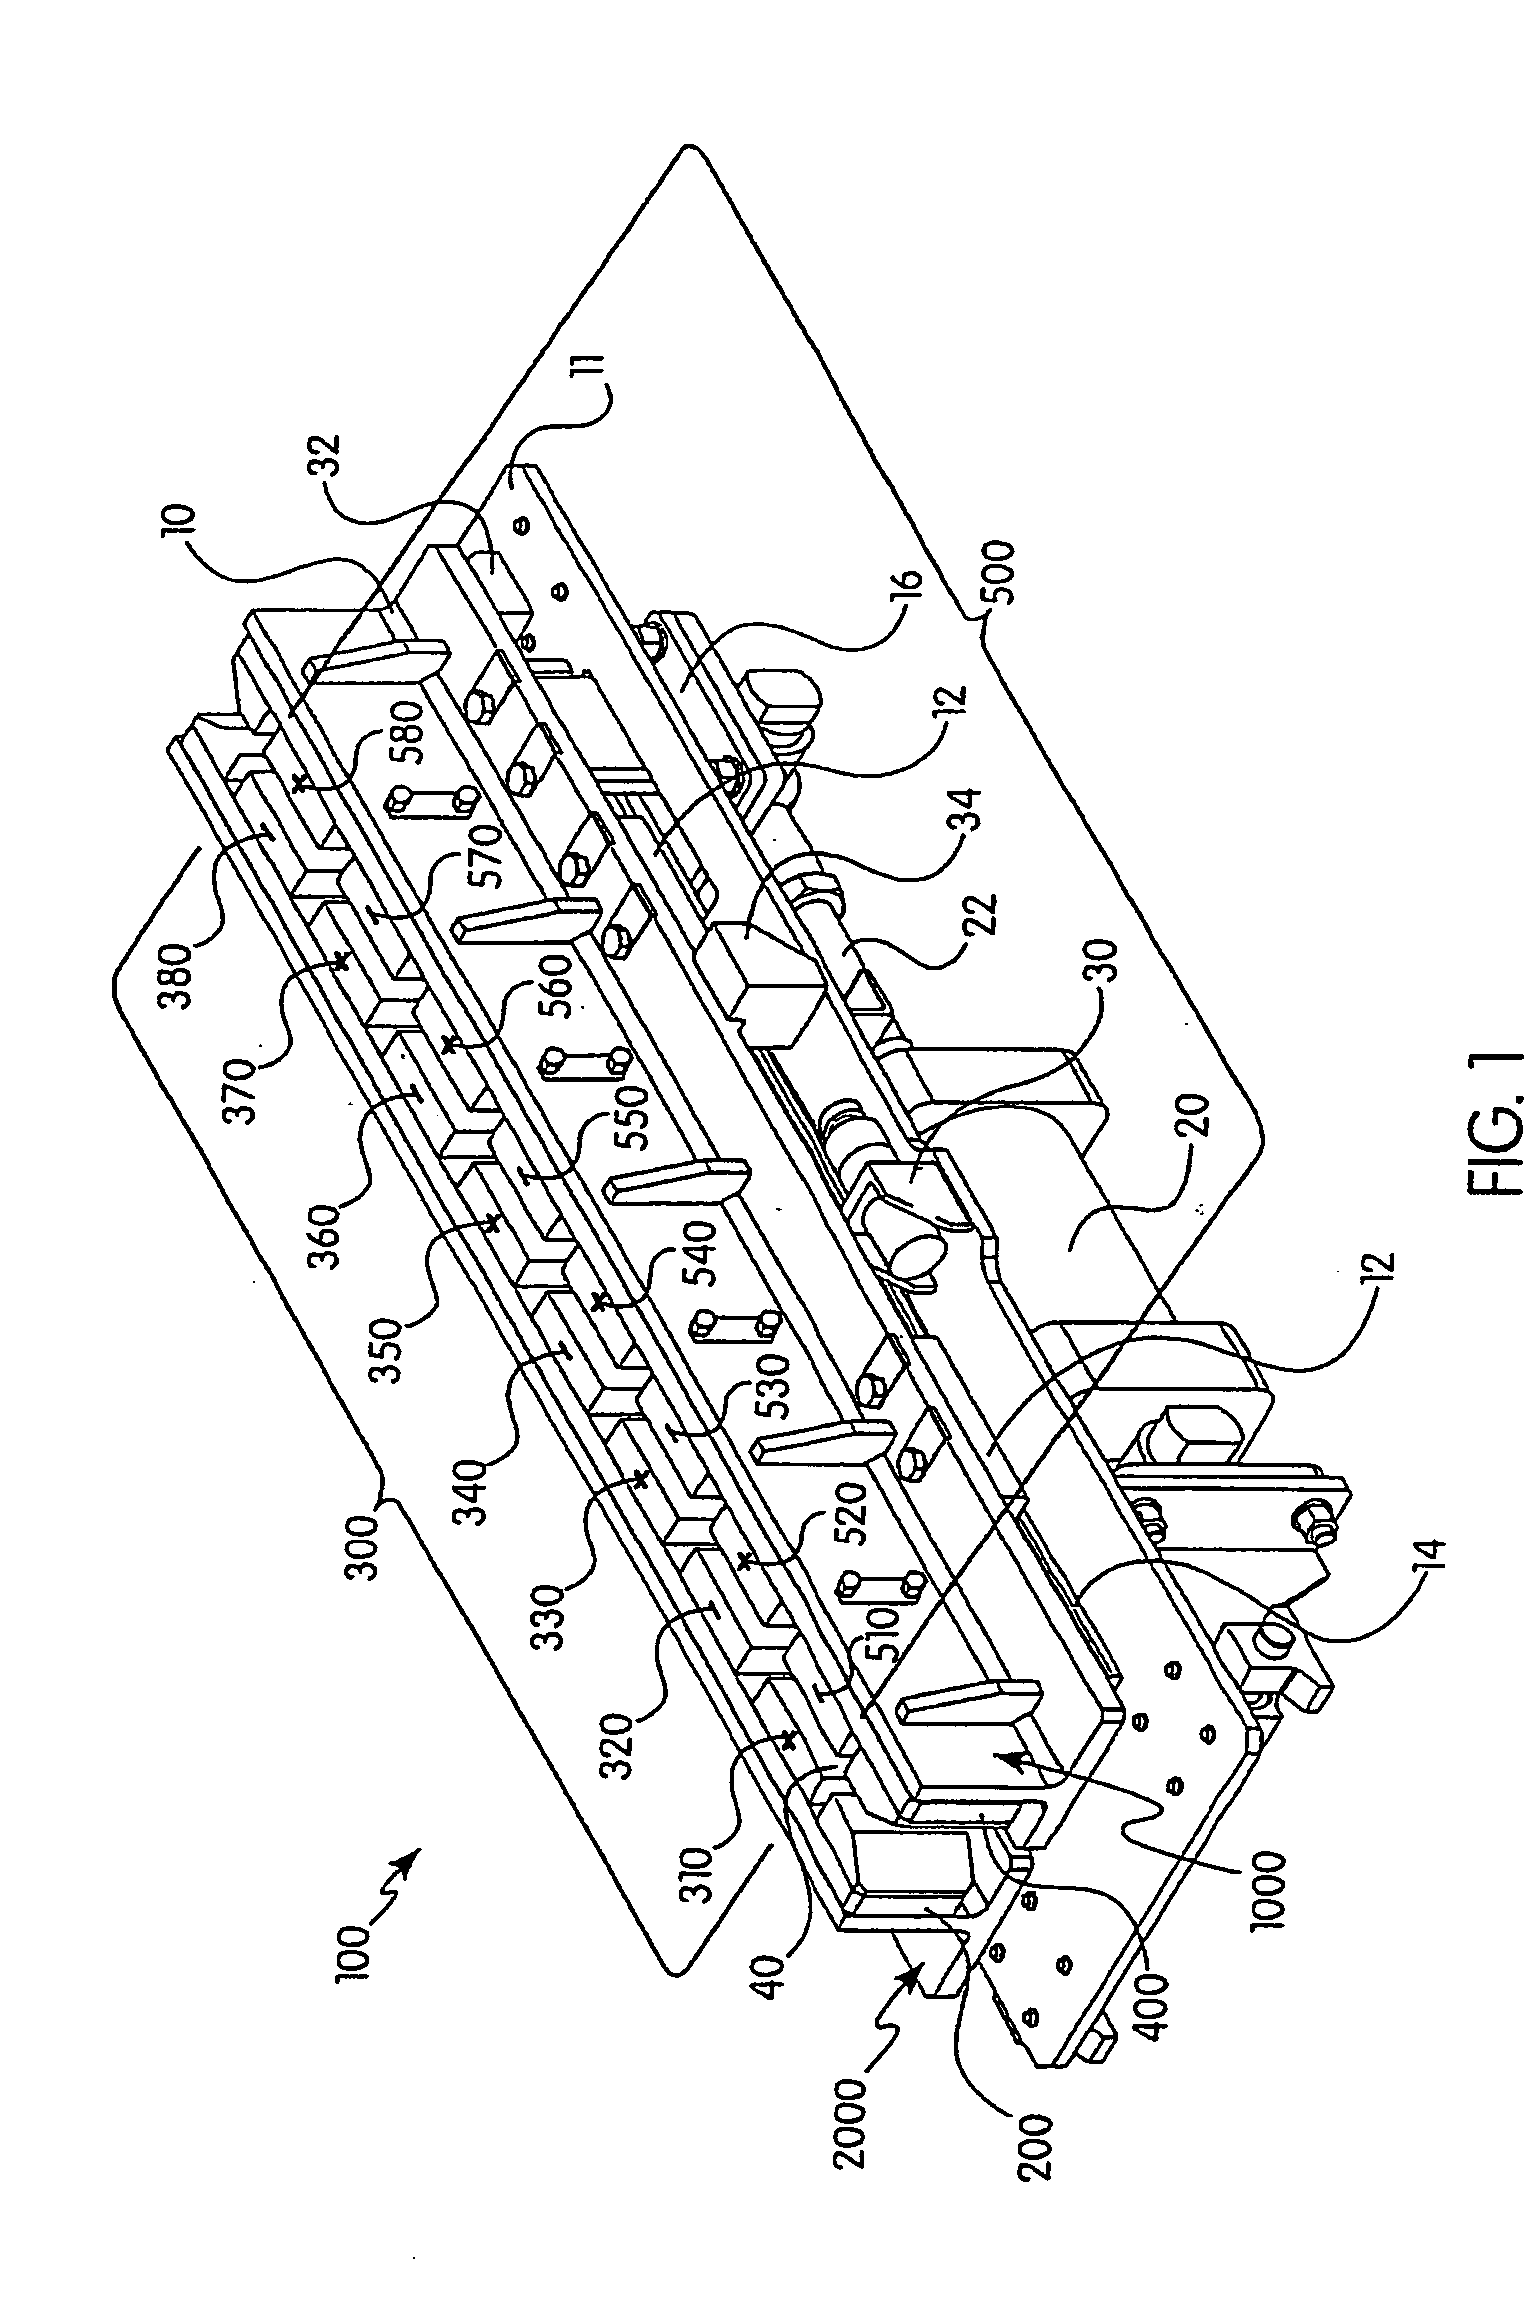 Selectively incrementally actuated linear eddy current braking system